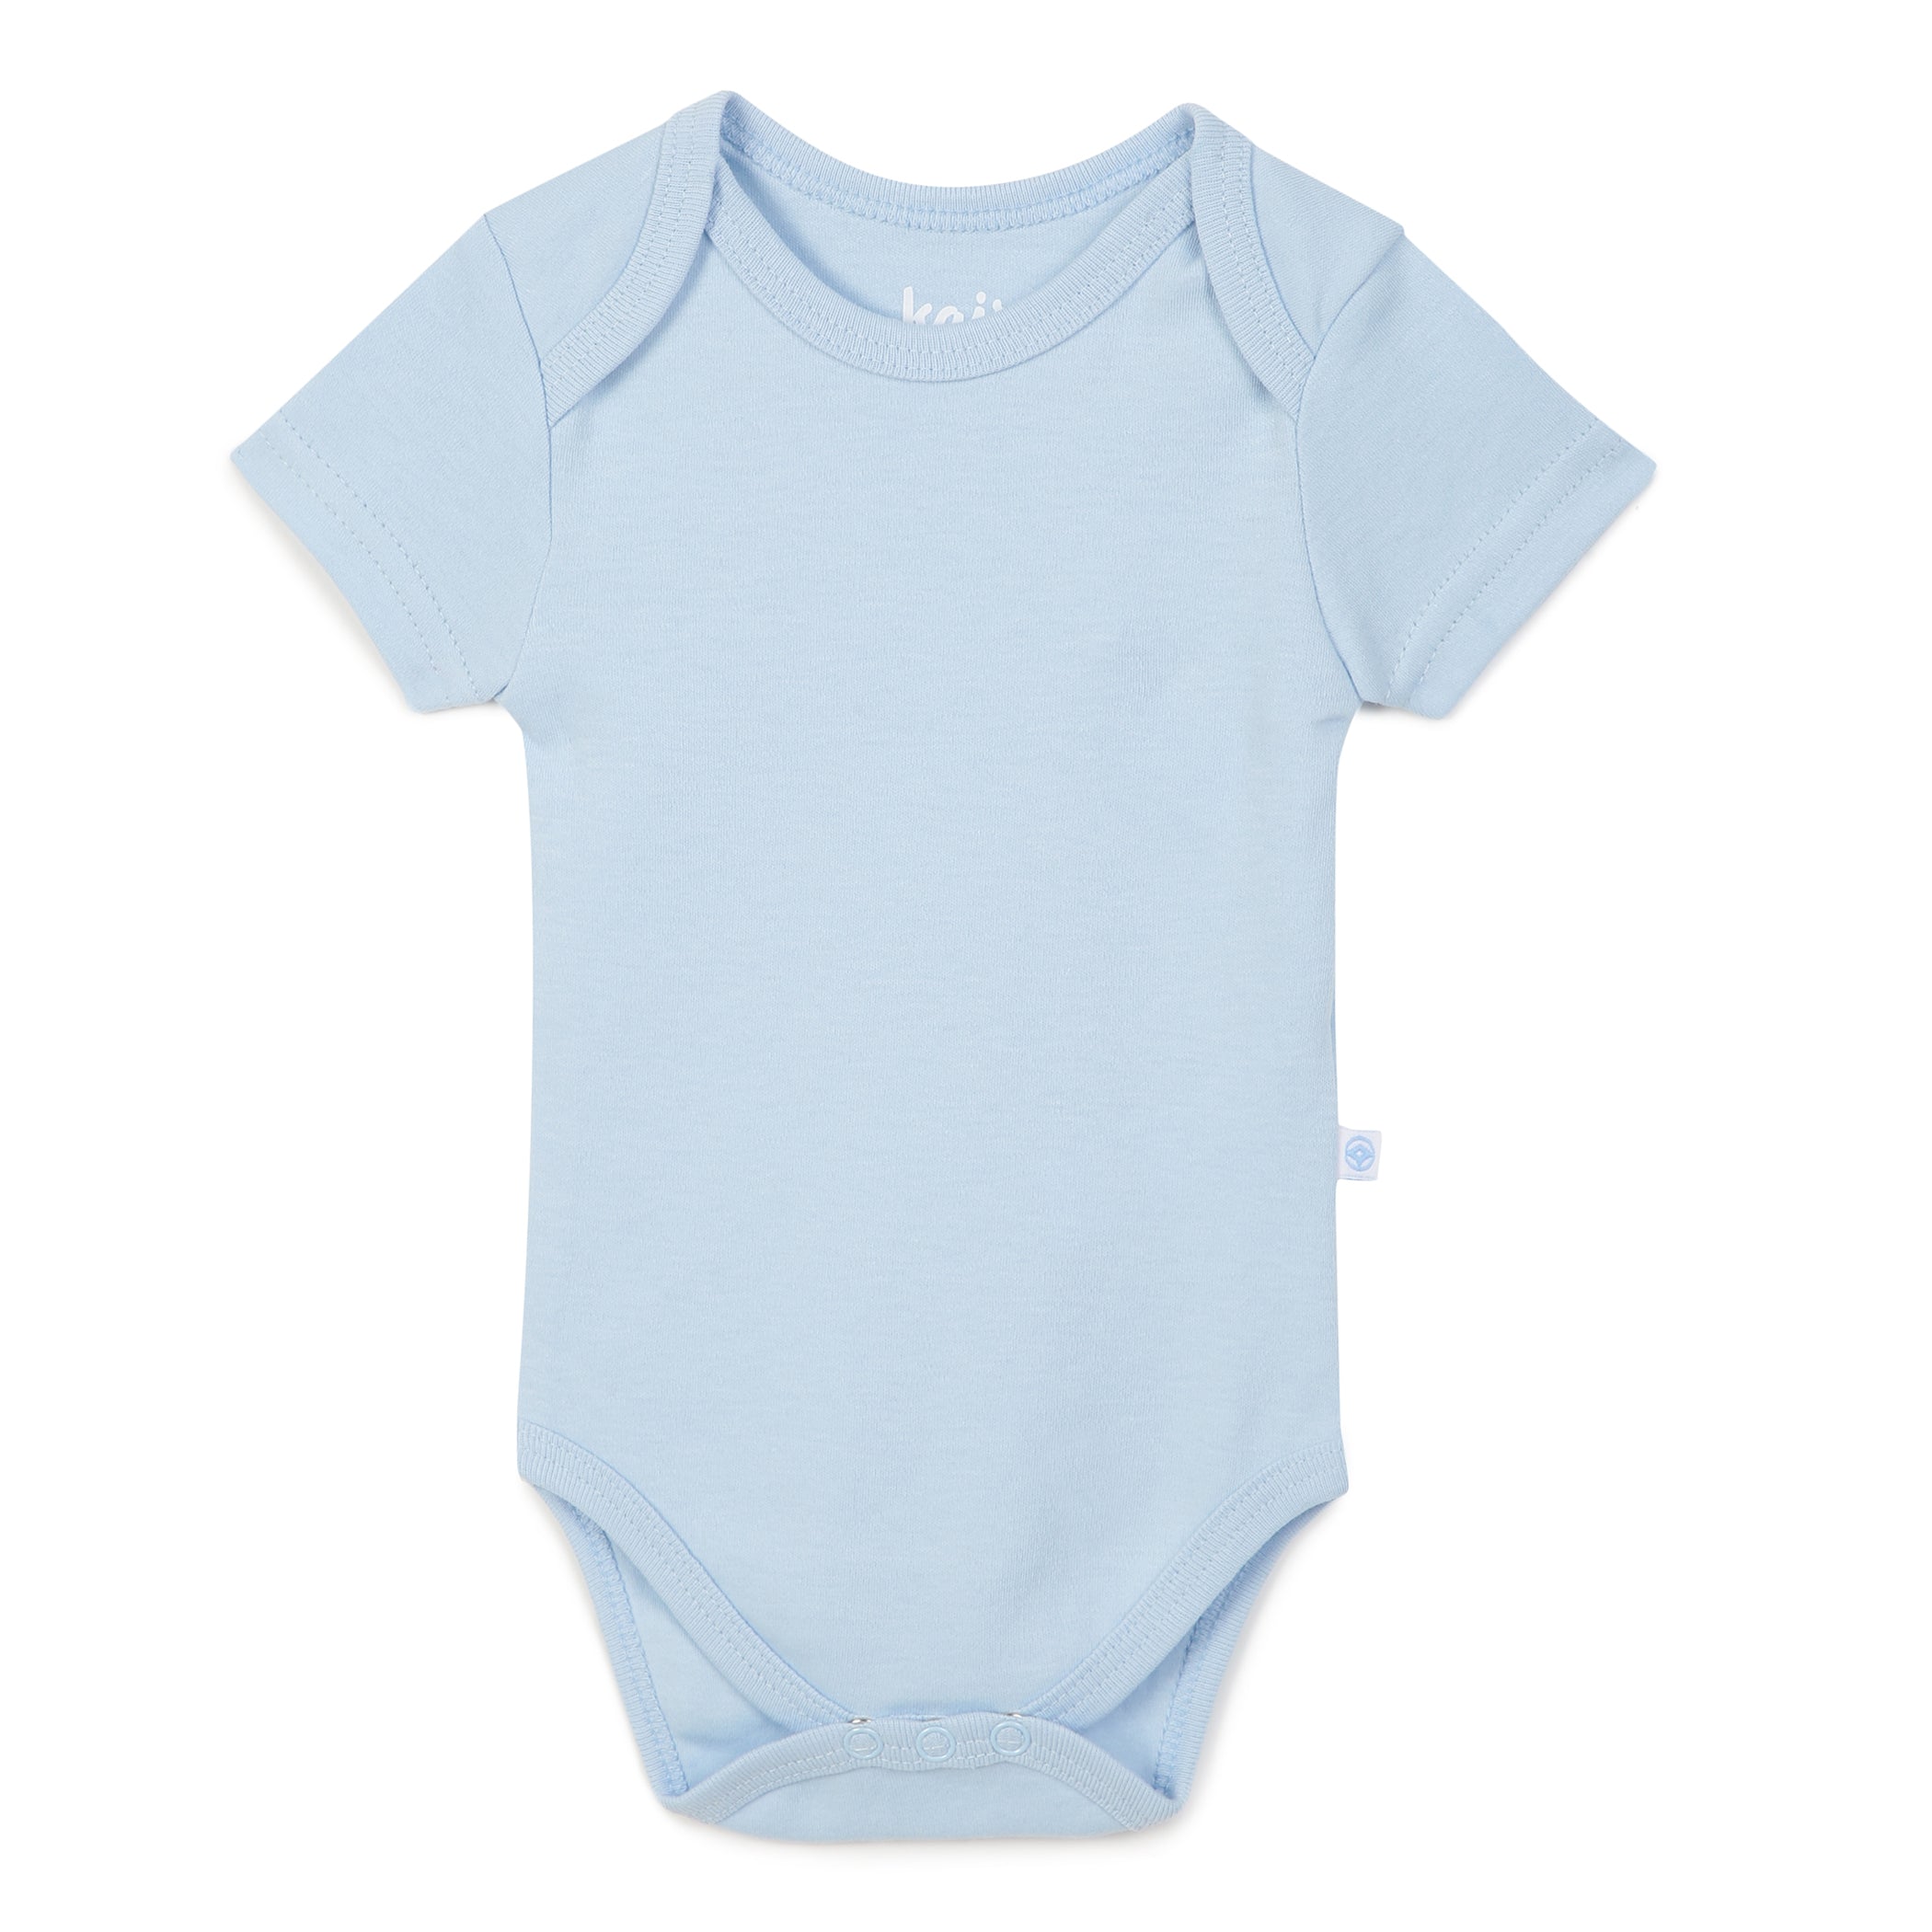 Babies Pack of 3 Sizes Solid Bodysuits